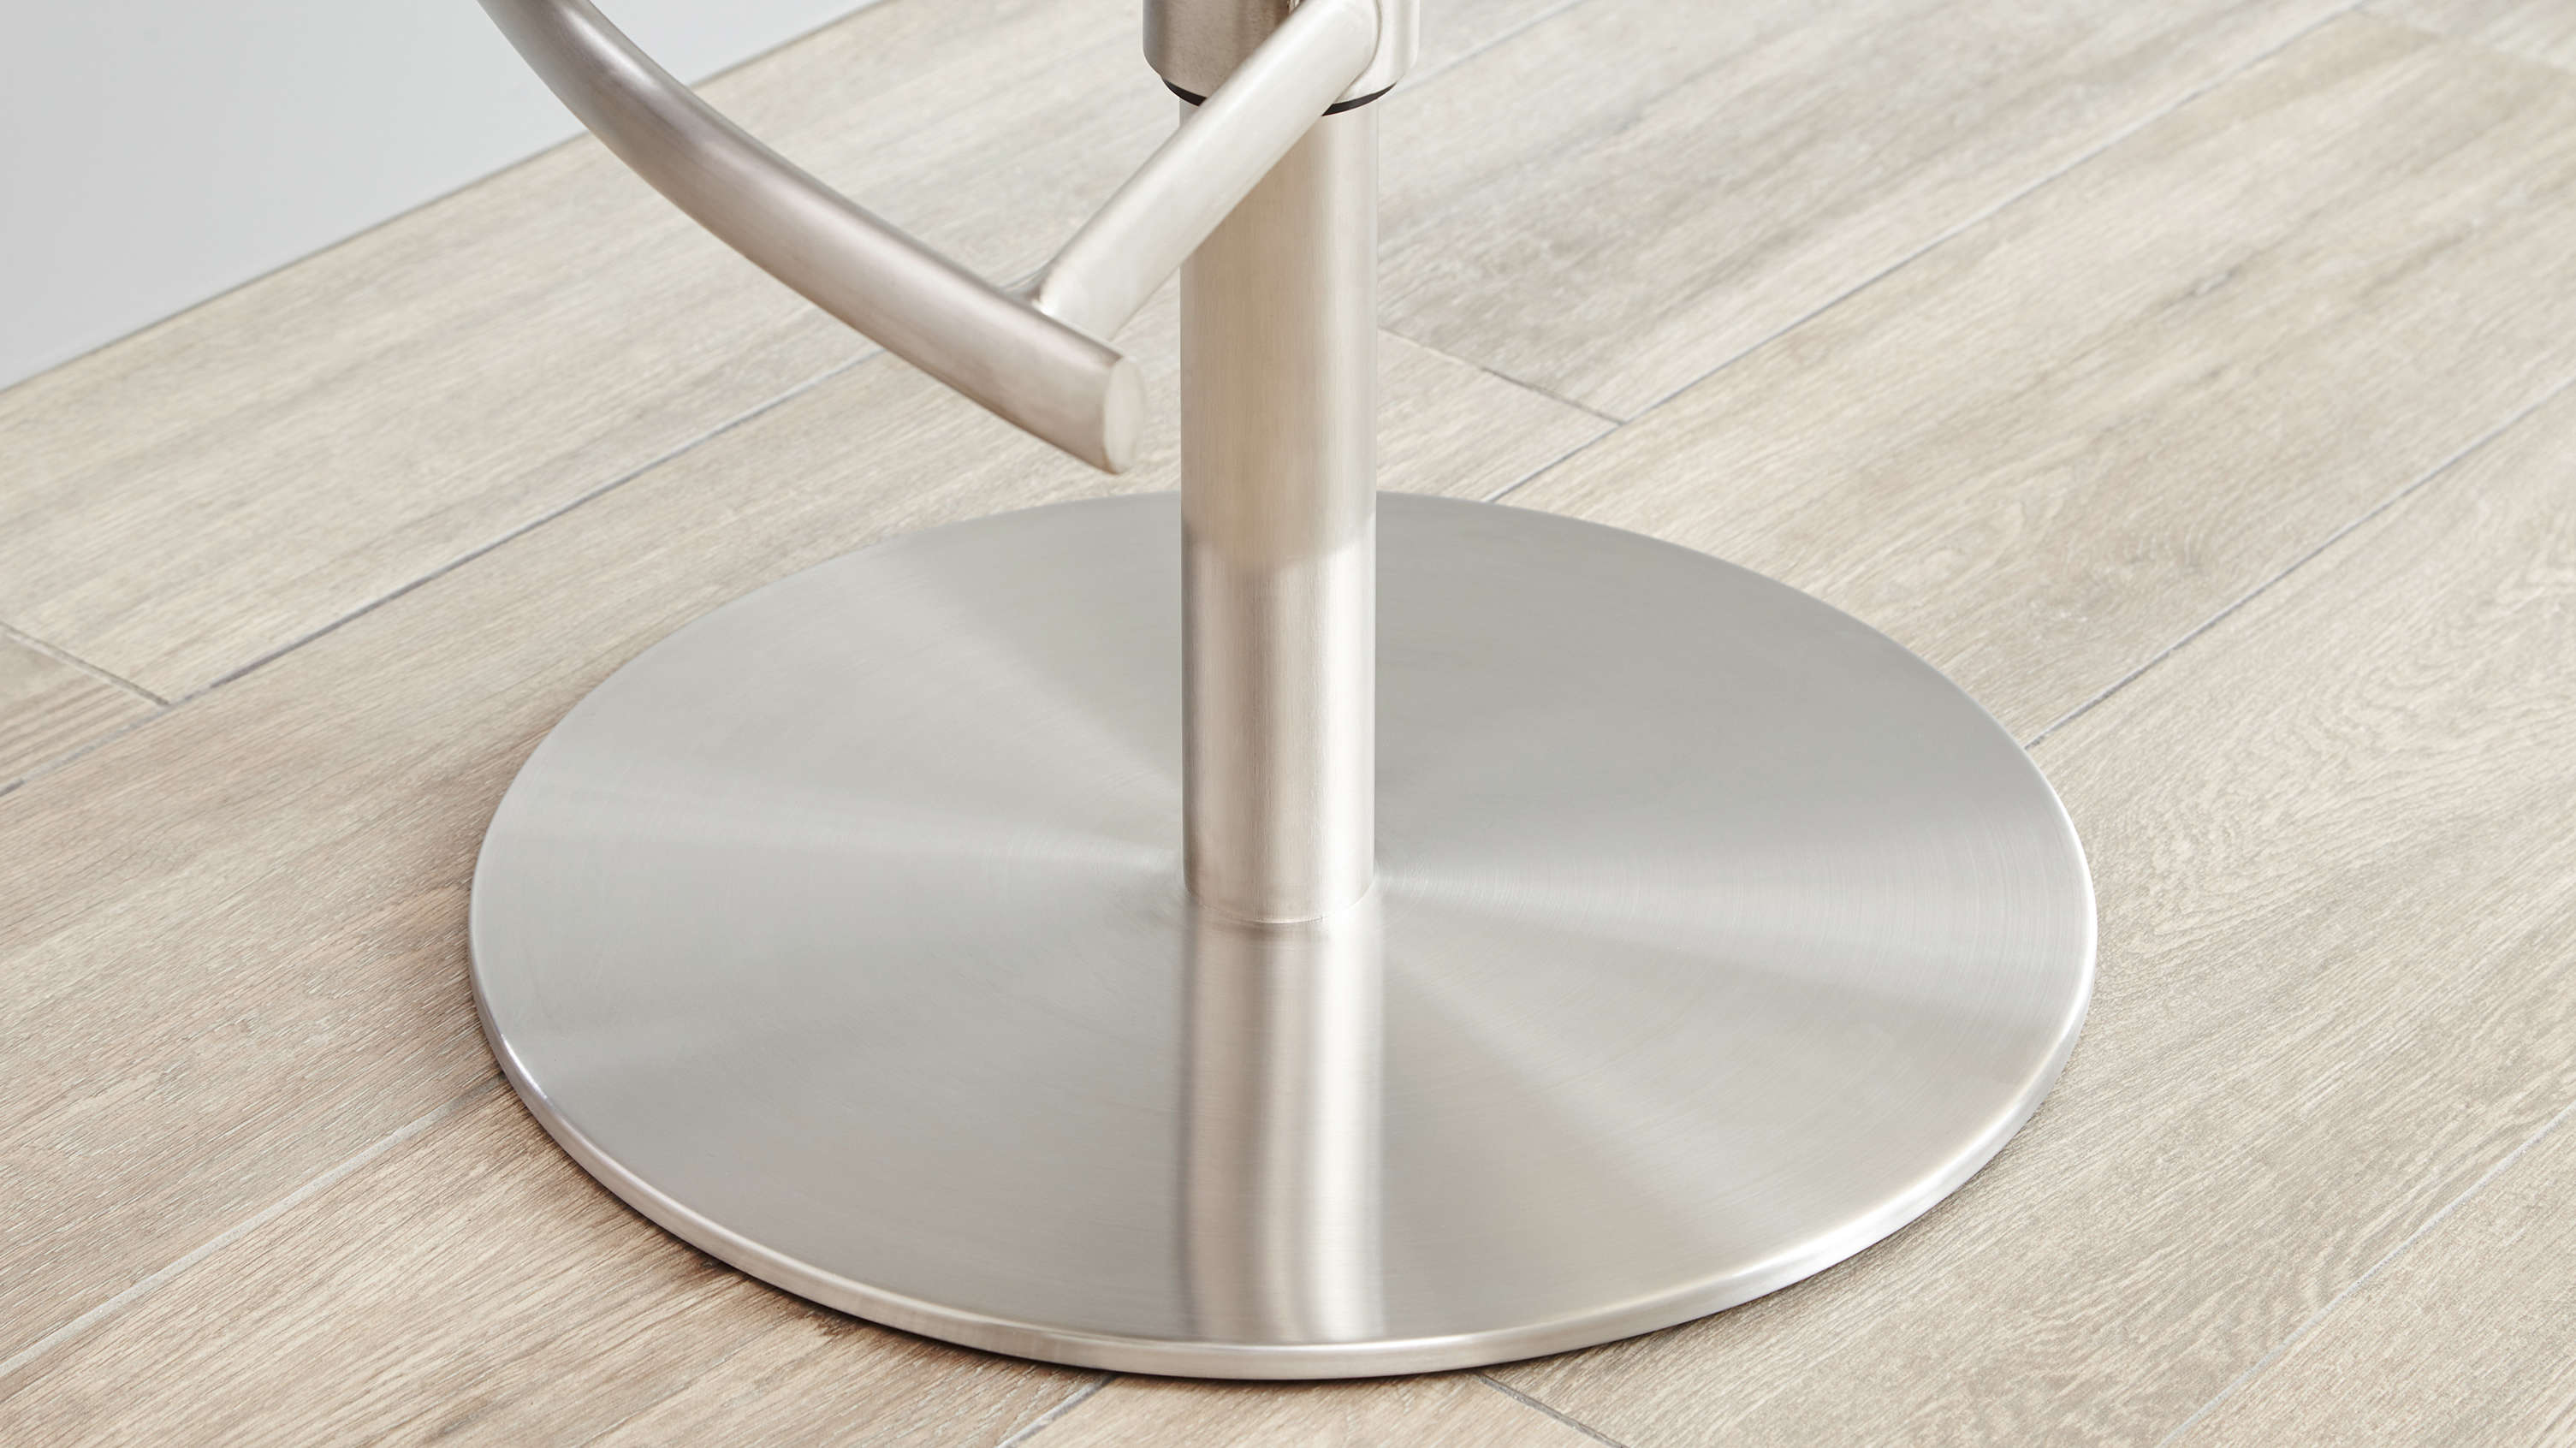 Pair of Elise Stainless Steel Gas Lift Bar Stool - Image 2 of 3